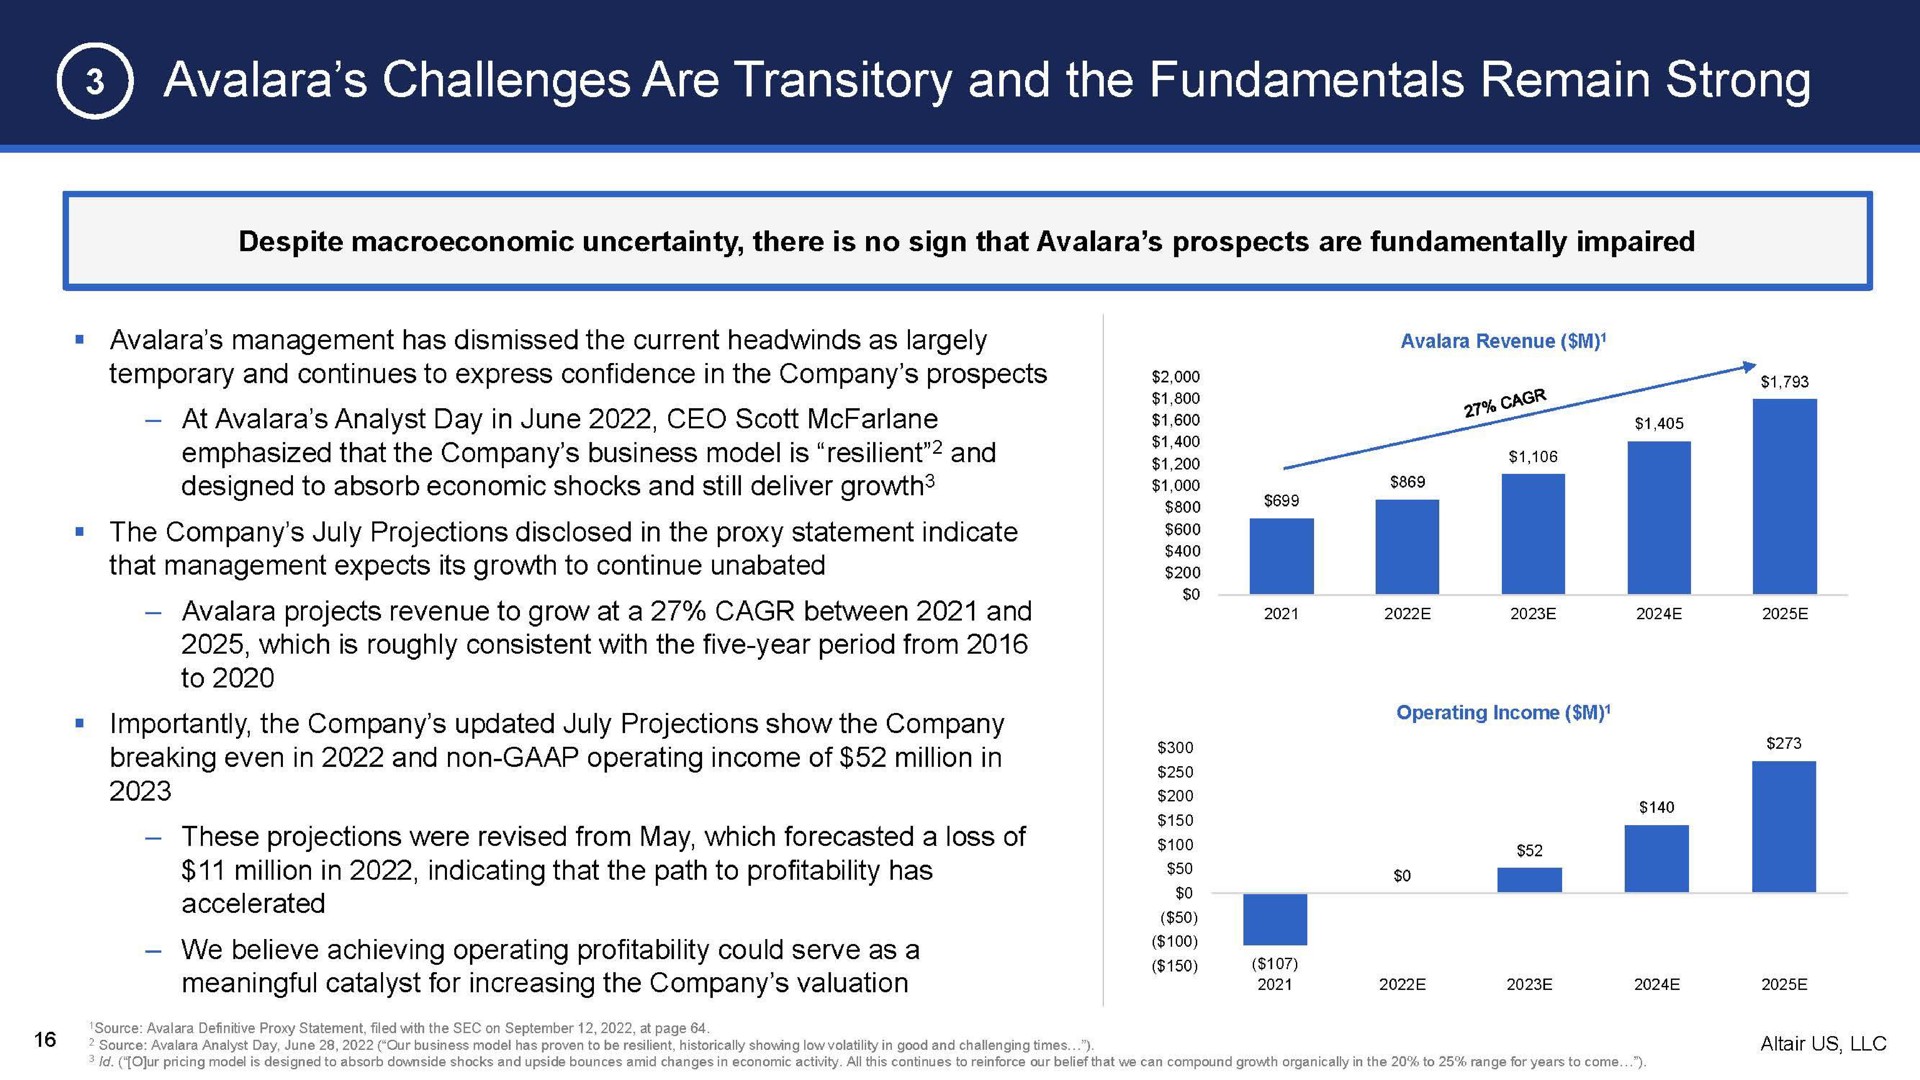 challenges are transitory and the fundamentals remain strong | Altair US LLC